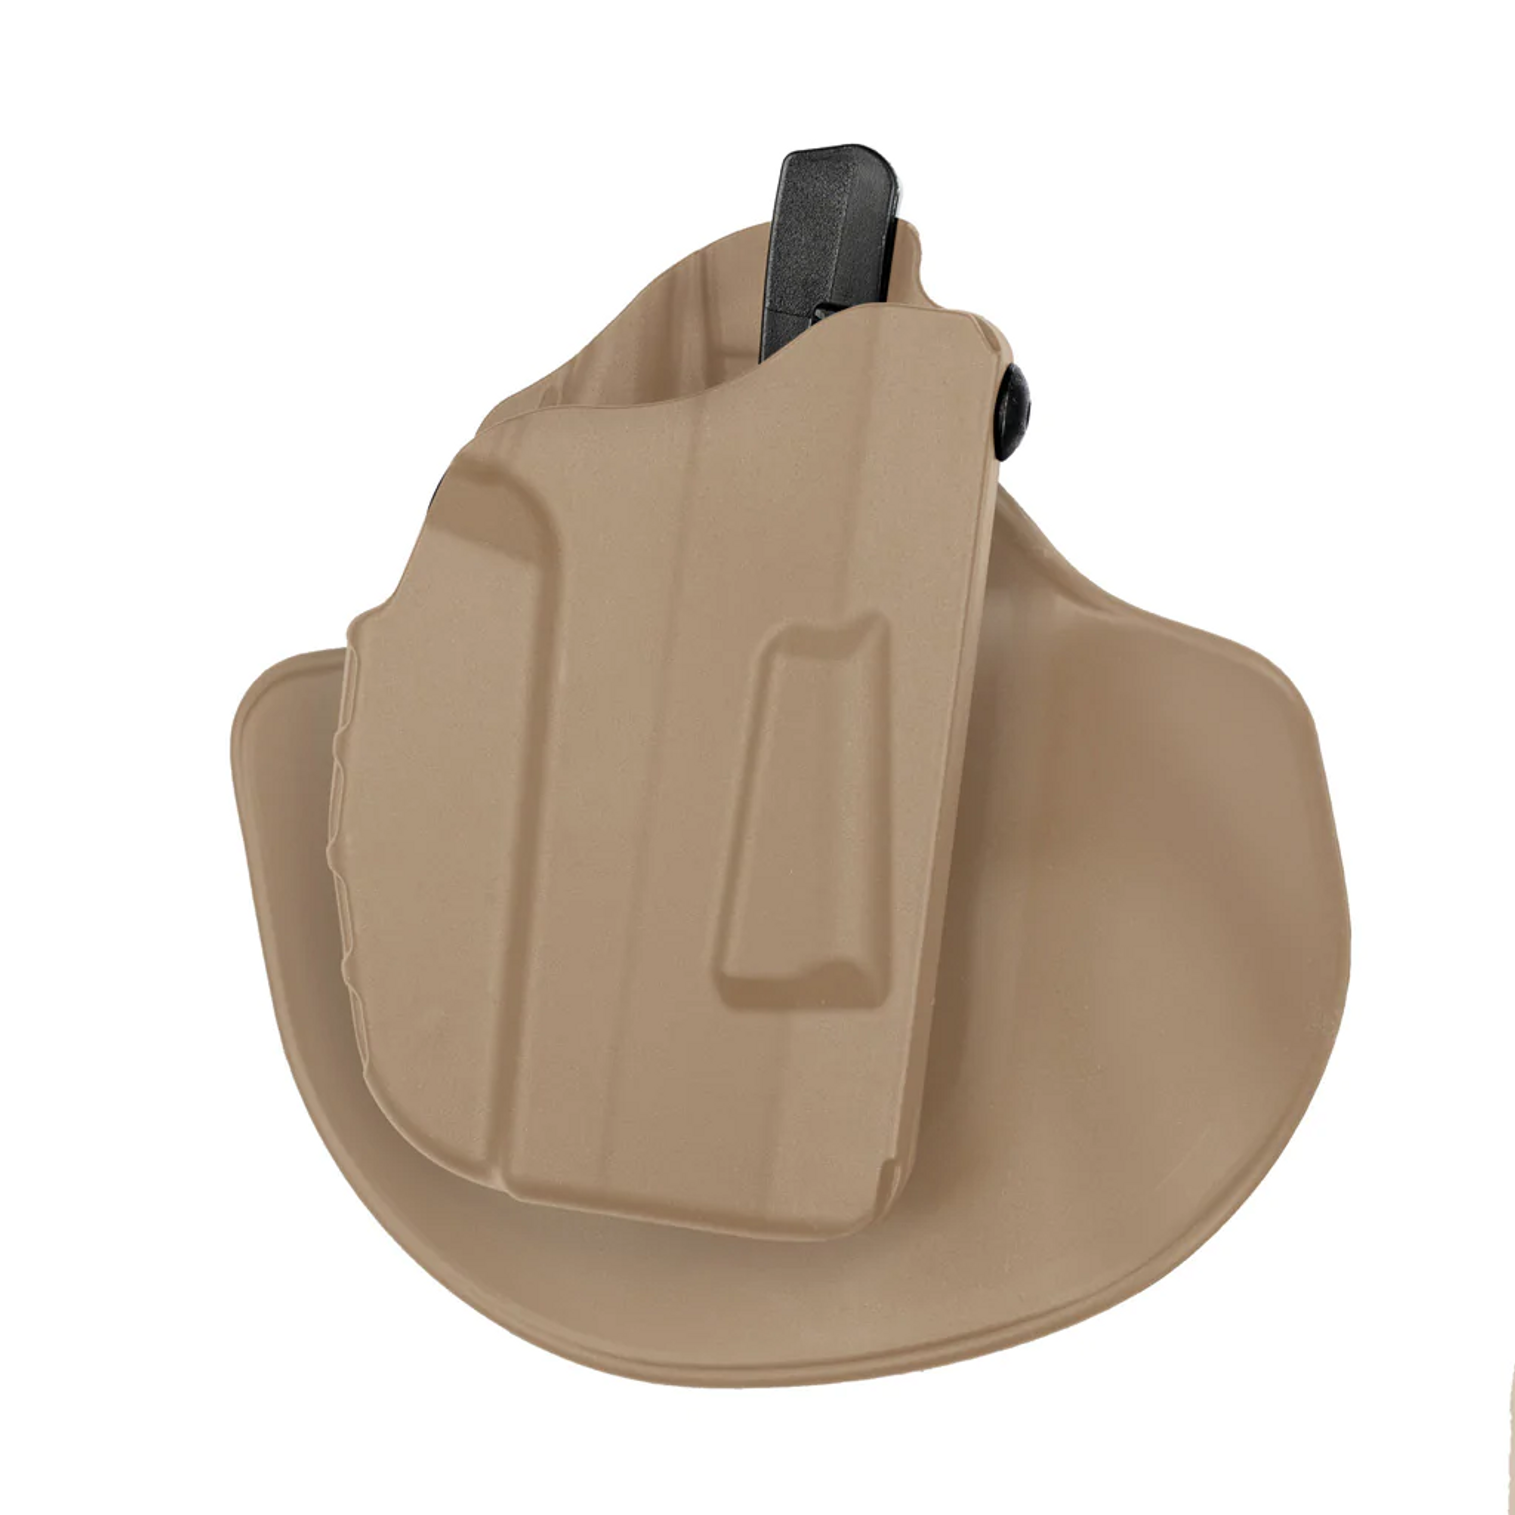 Model 7378 7ts Als Concealment Paddle And Belt Loop Combo Holster For Glock 17 W/ Light - KR7378-8325-551